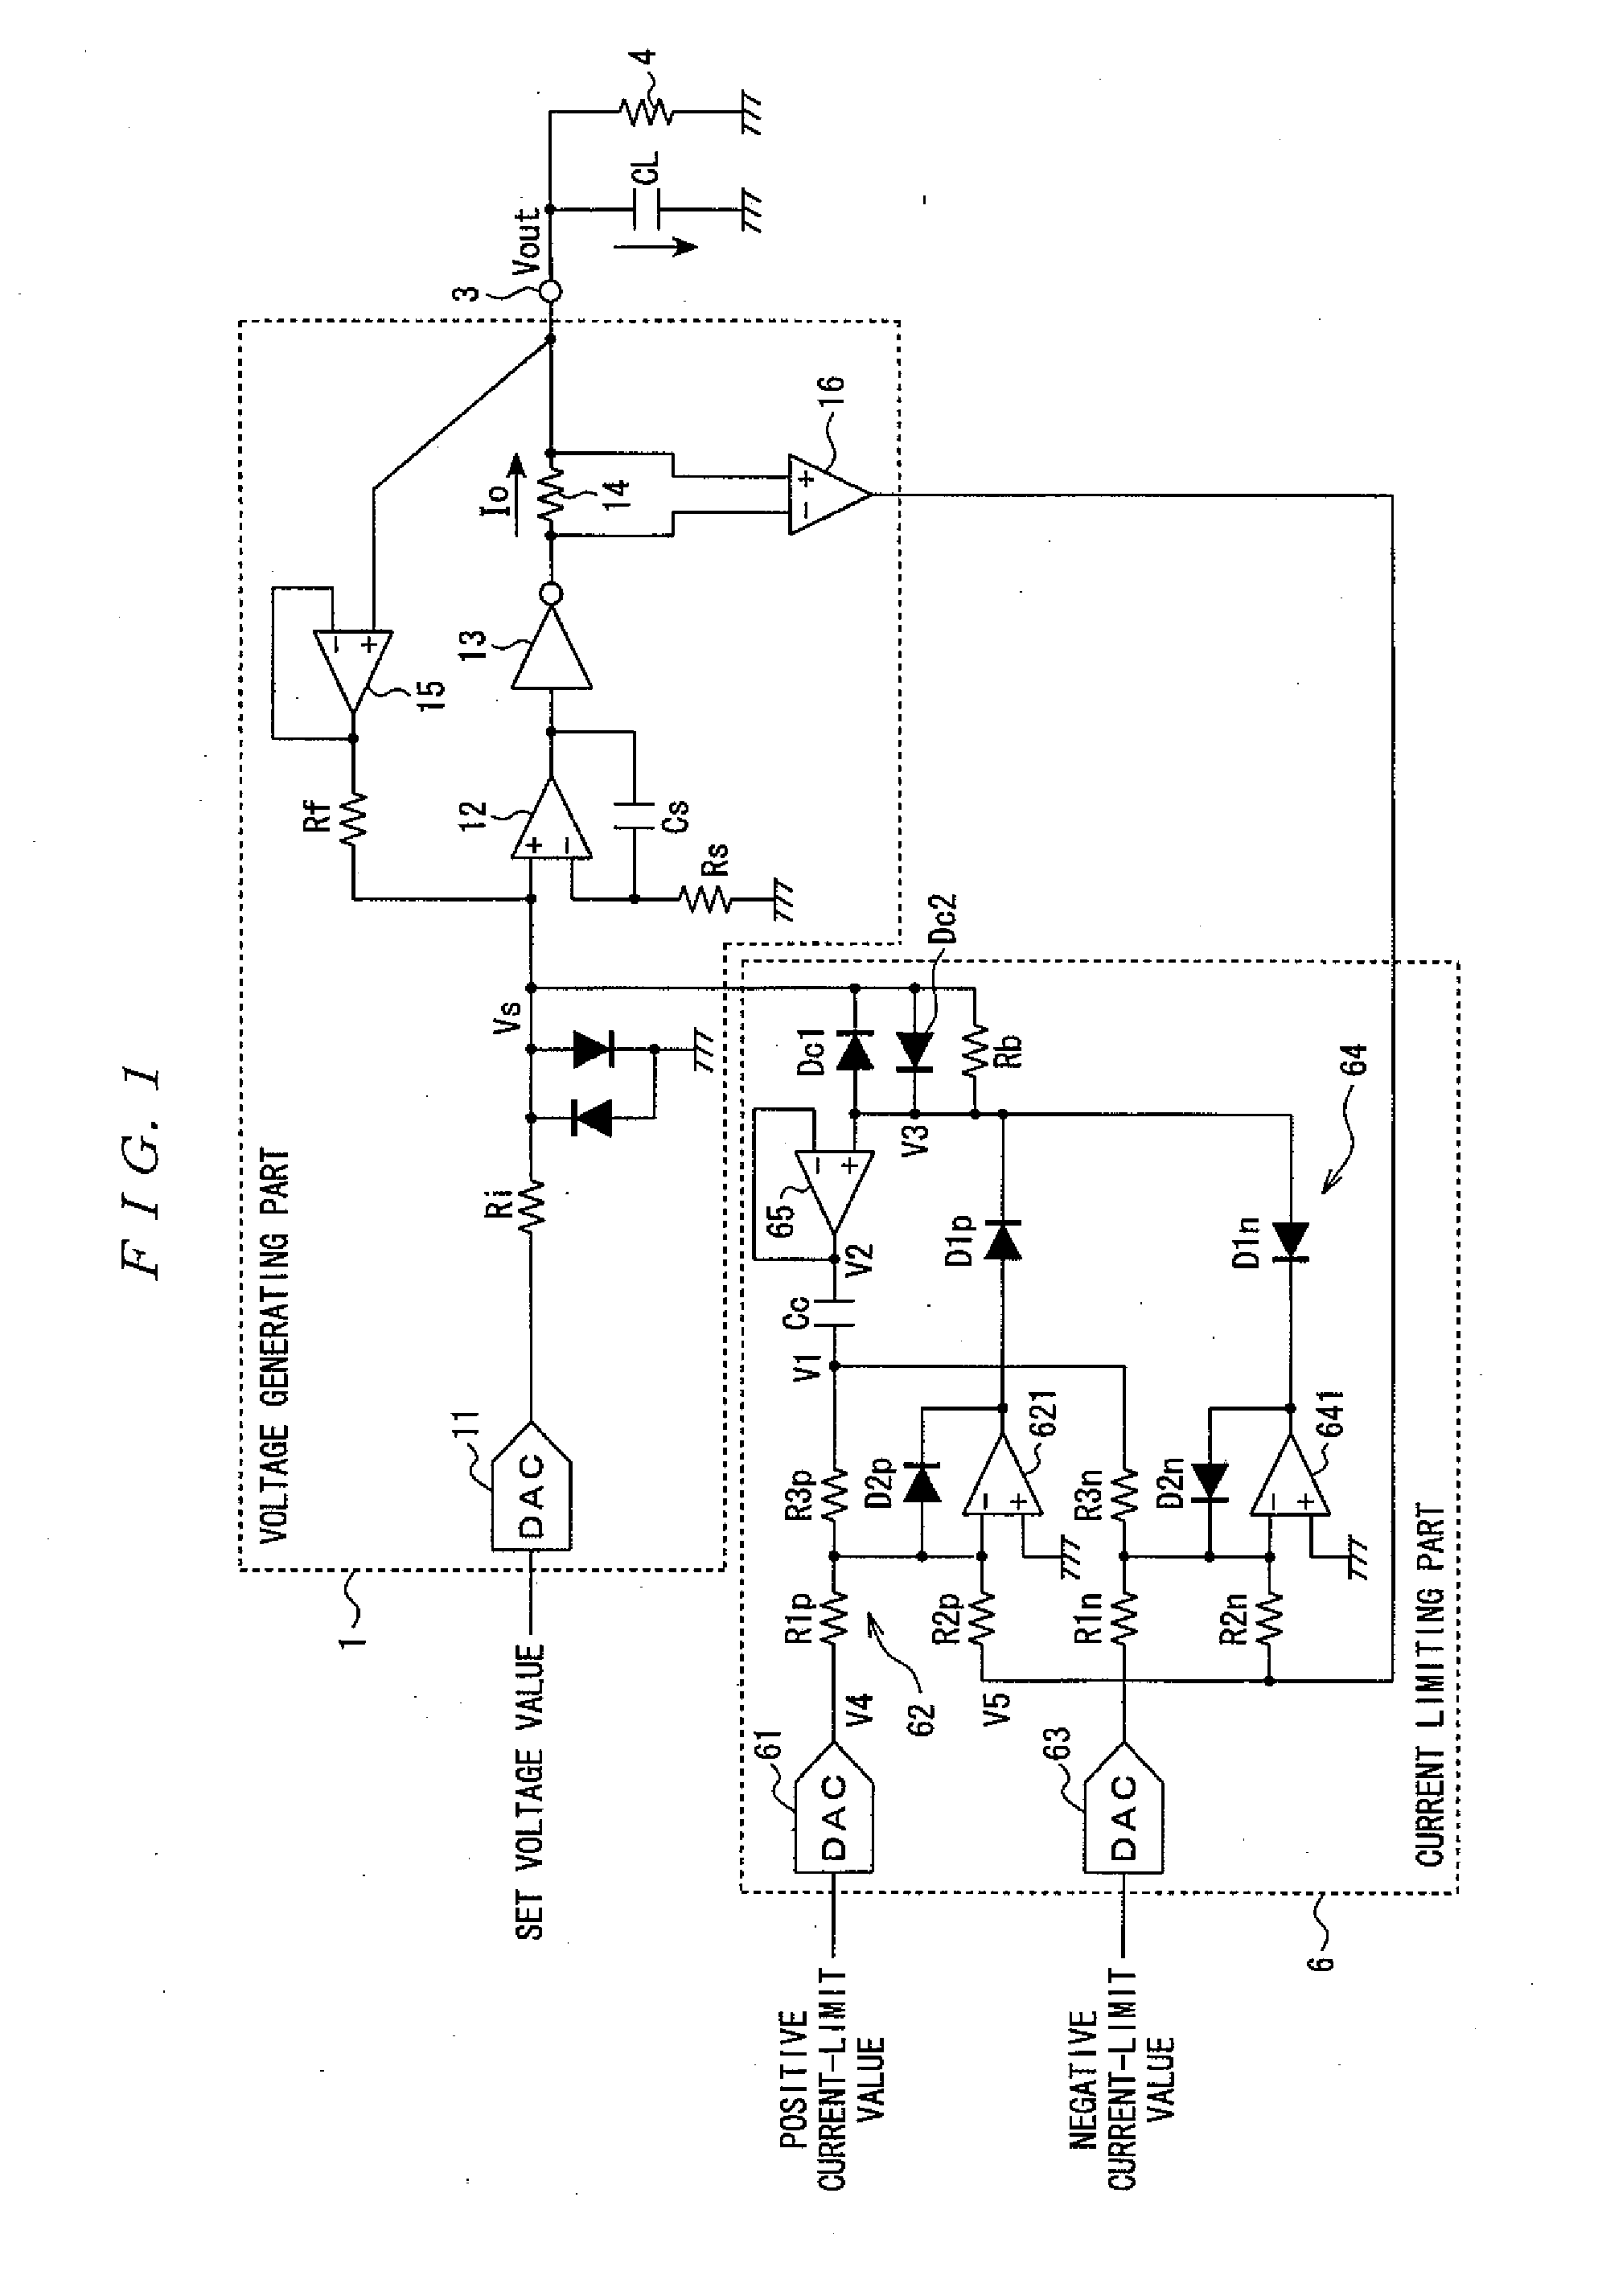 Direct current measuring apparatus and limiting circuit